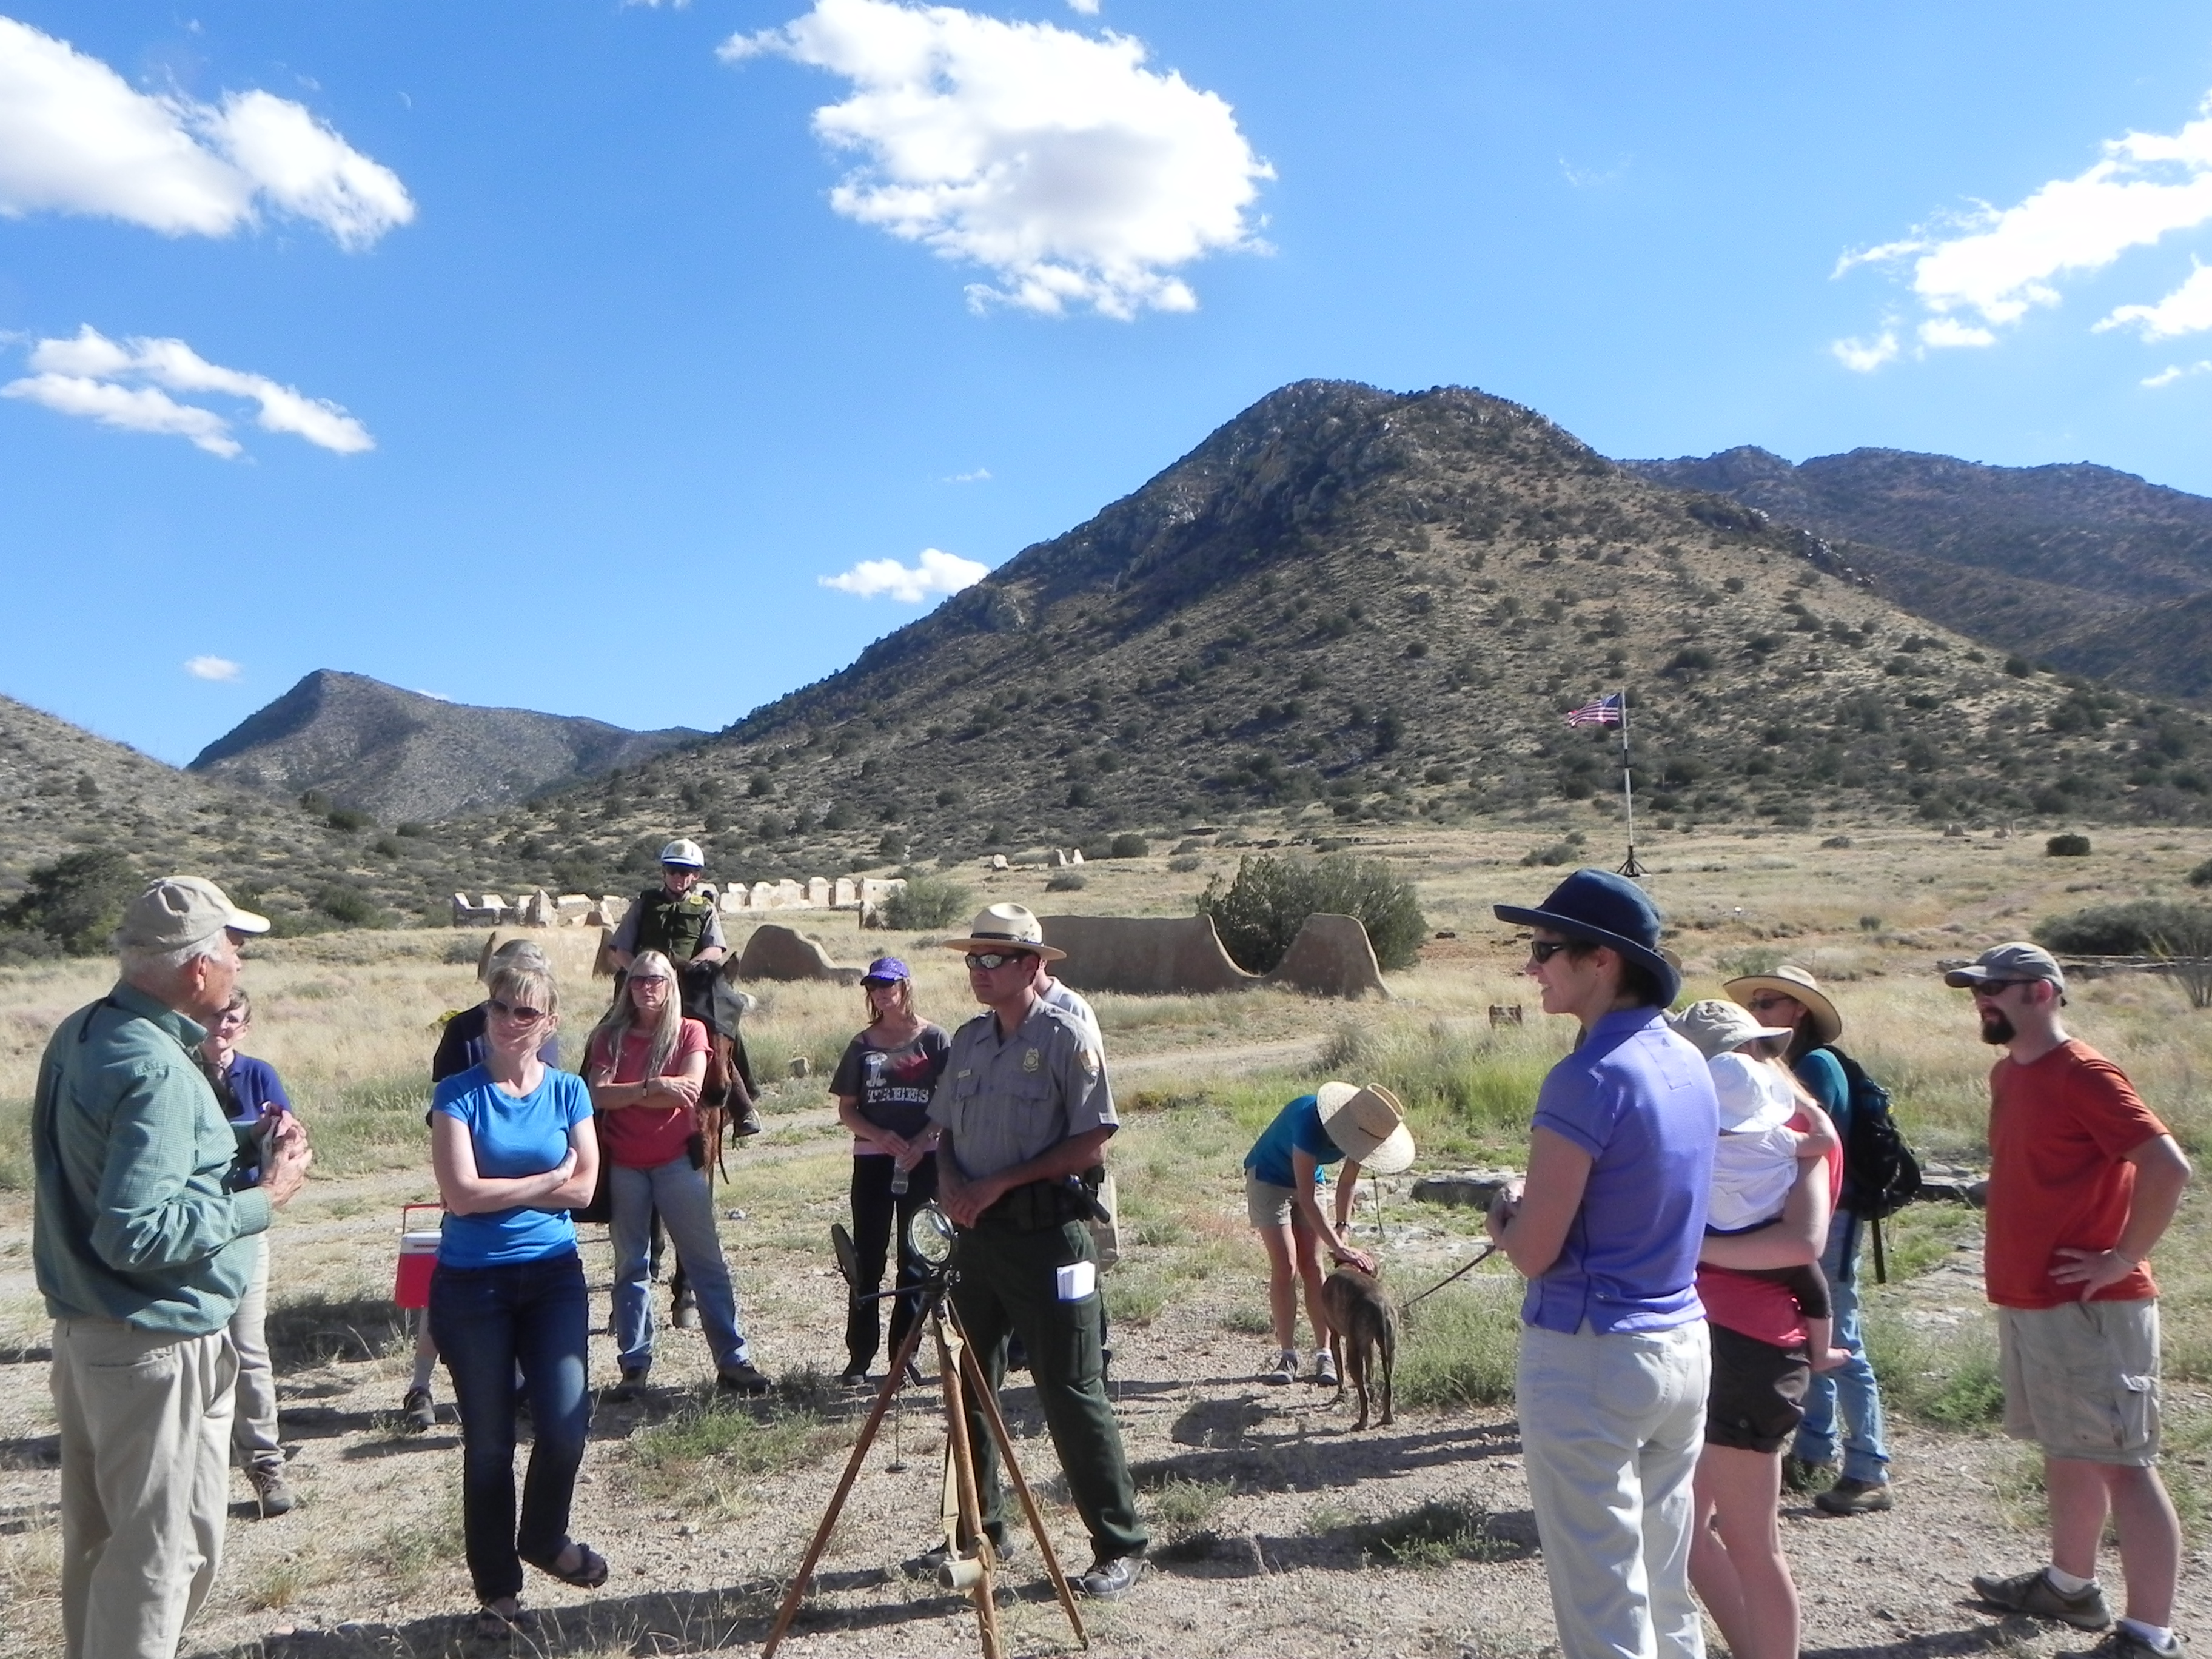 A group gathers as a ranger displays the heliograph equipment